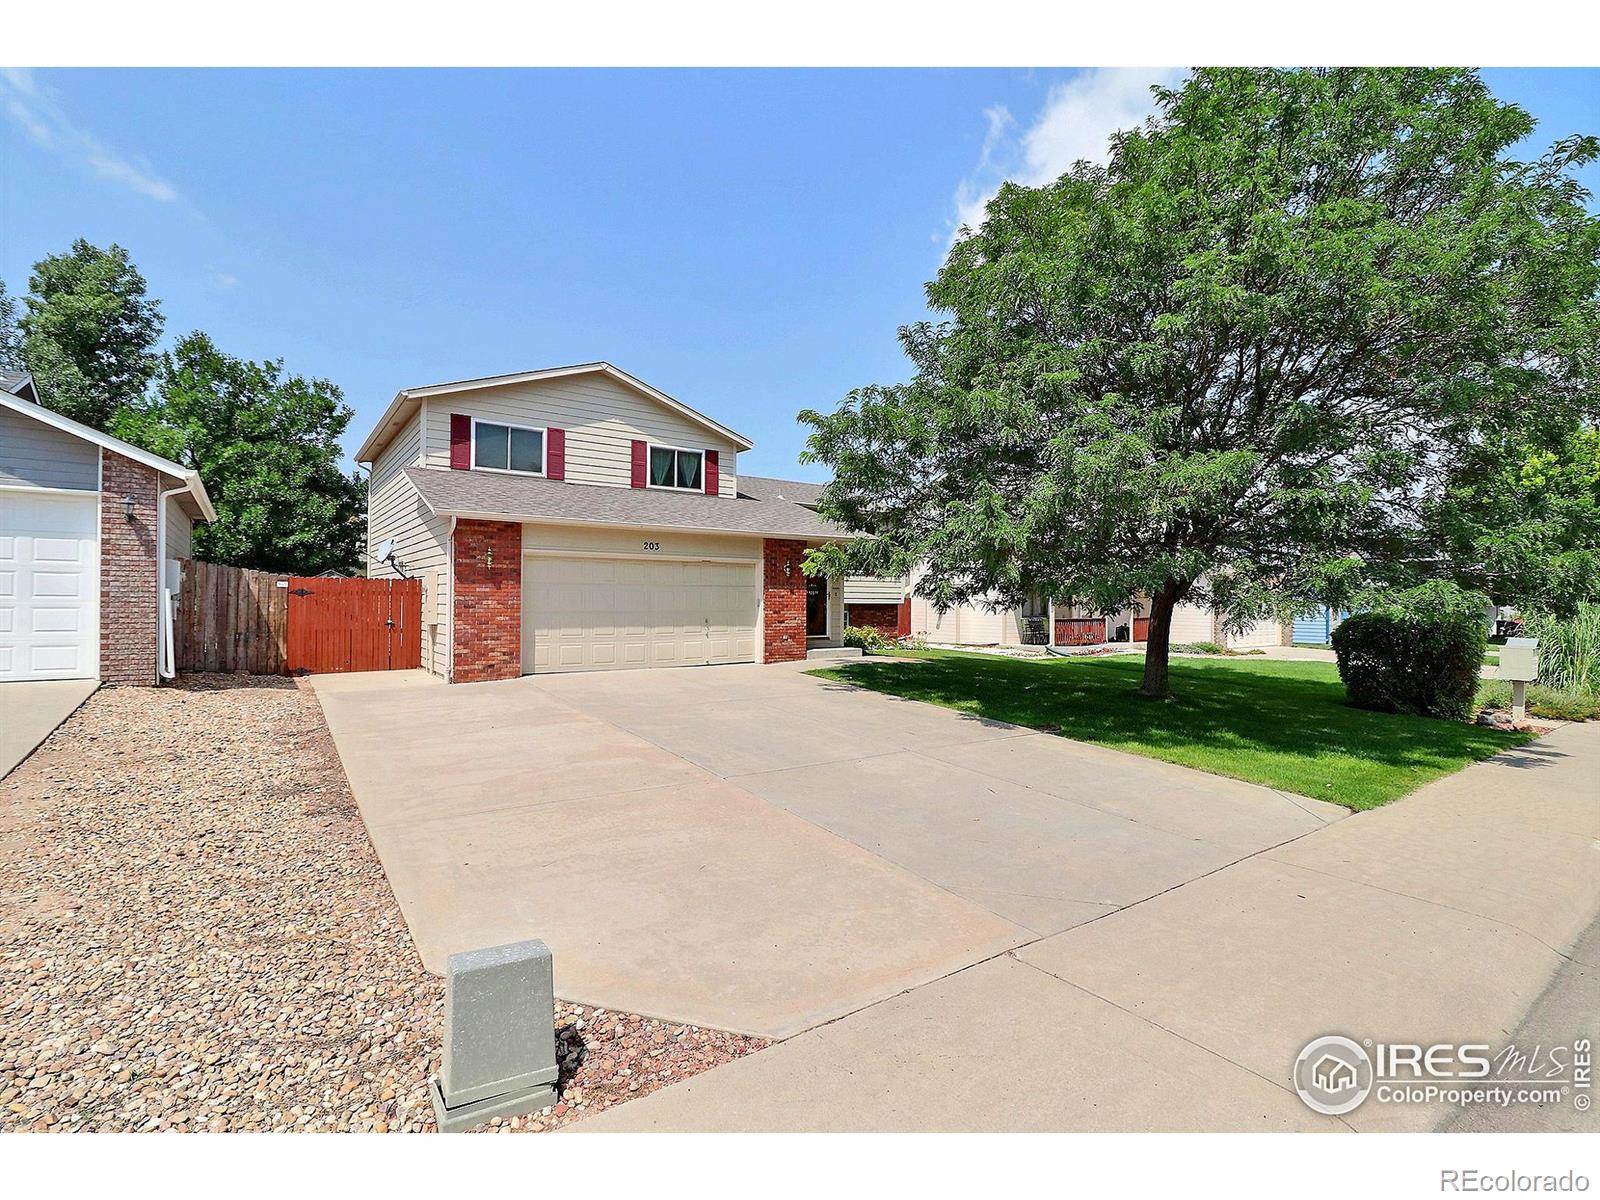 203  50th Ave Pl, greeley MLS: 456789998278 Beds: 3 Baths: 2 Price: $419,900